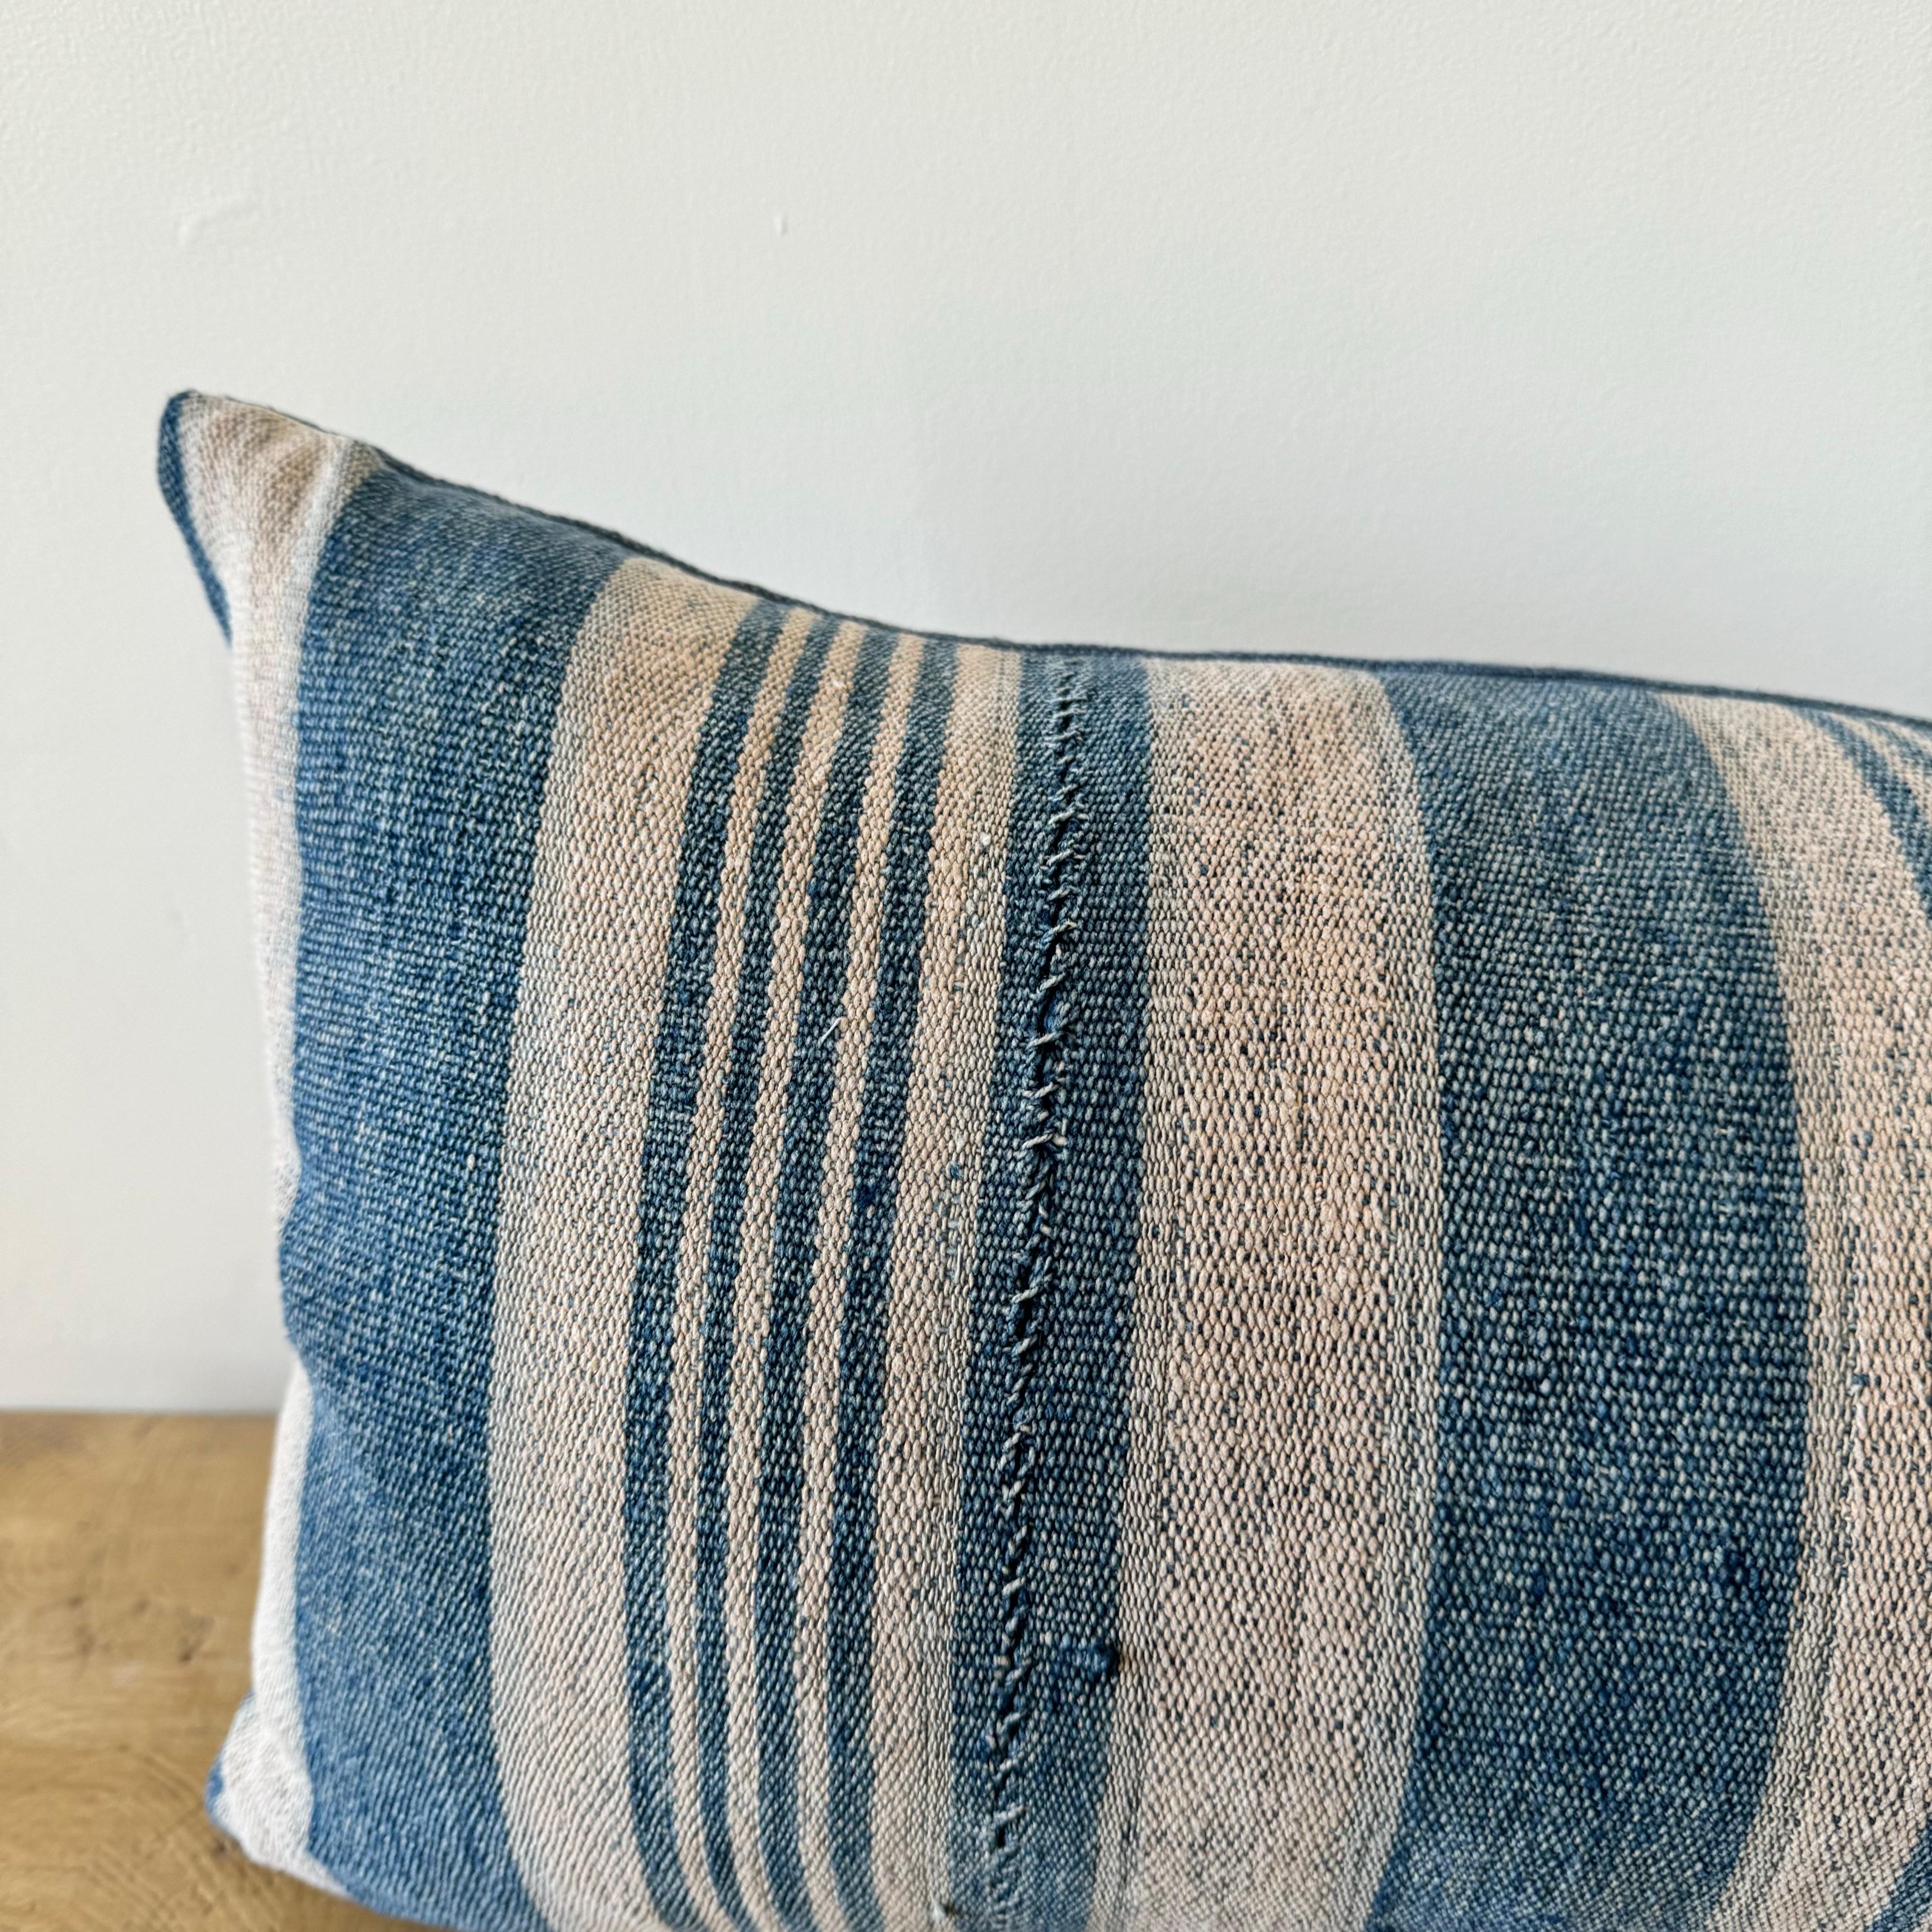 Vintage Textile Blue Stripe Batik Lumbar Pillow with Insert In Good Condition For Sale In Brea, CA